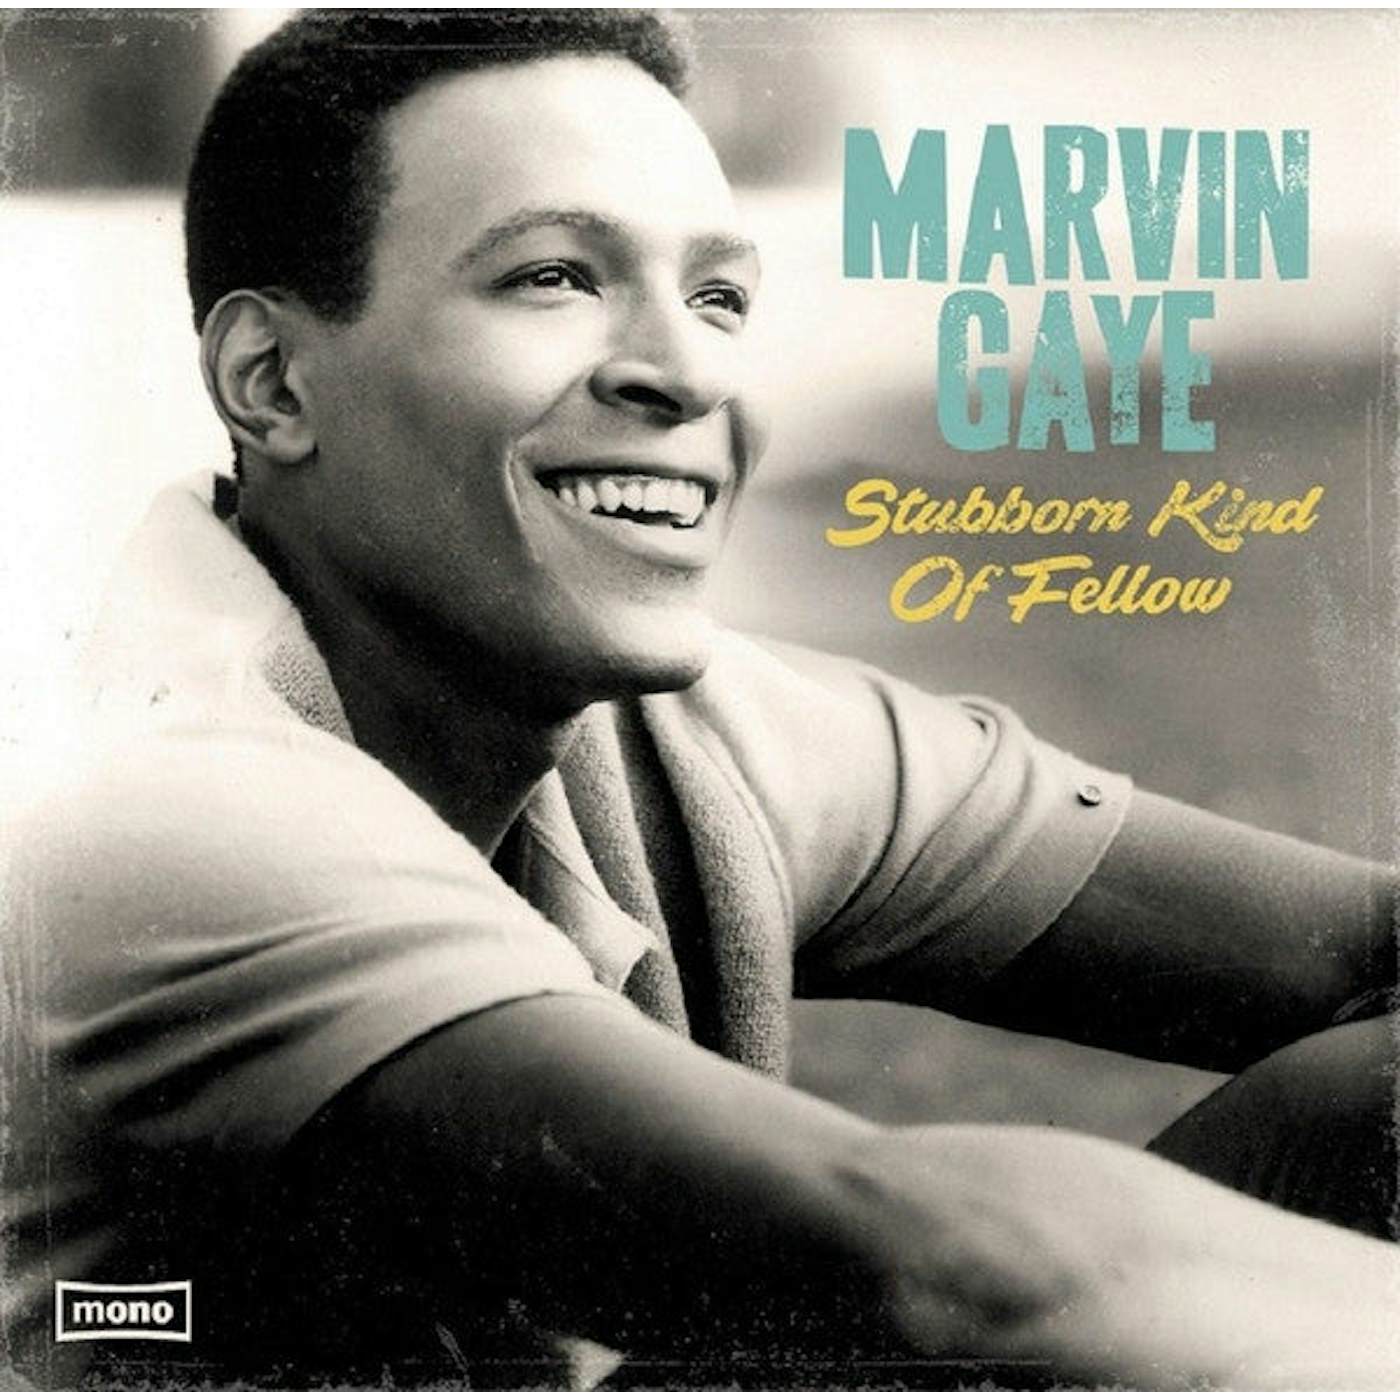 Marvin Gaye – What's Going On (2019, 180g, SuperVinyl, Vinyl) - Discogs